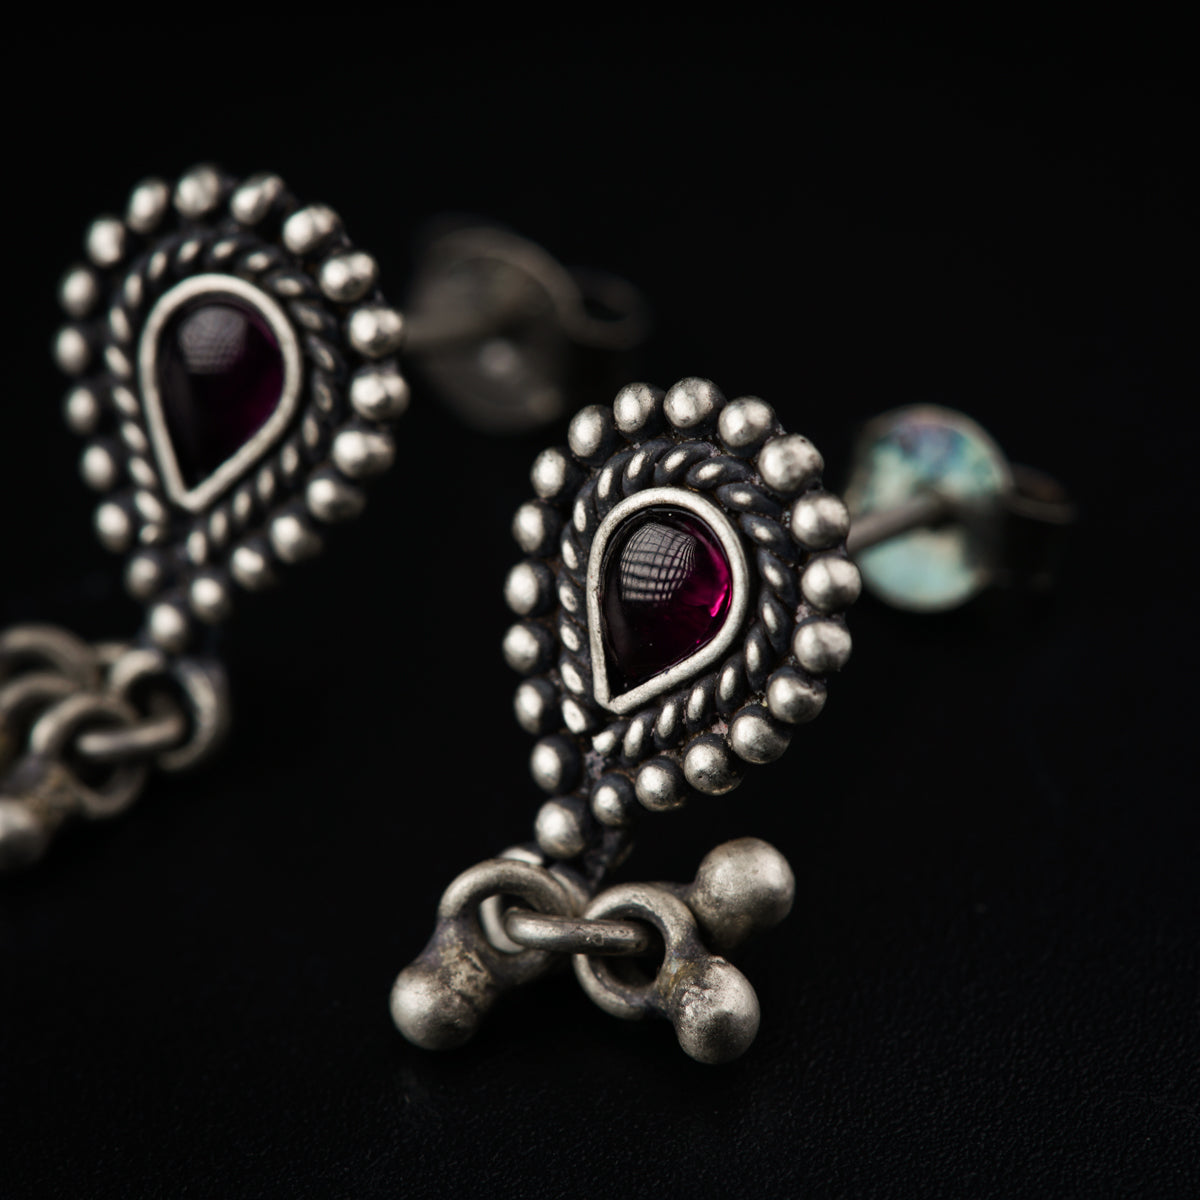 Silver Drop Shape with Ghungroo Motif Studs